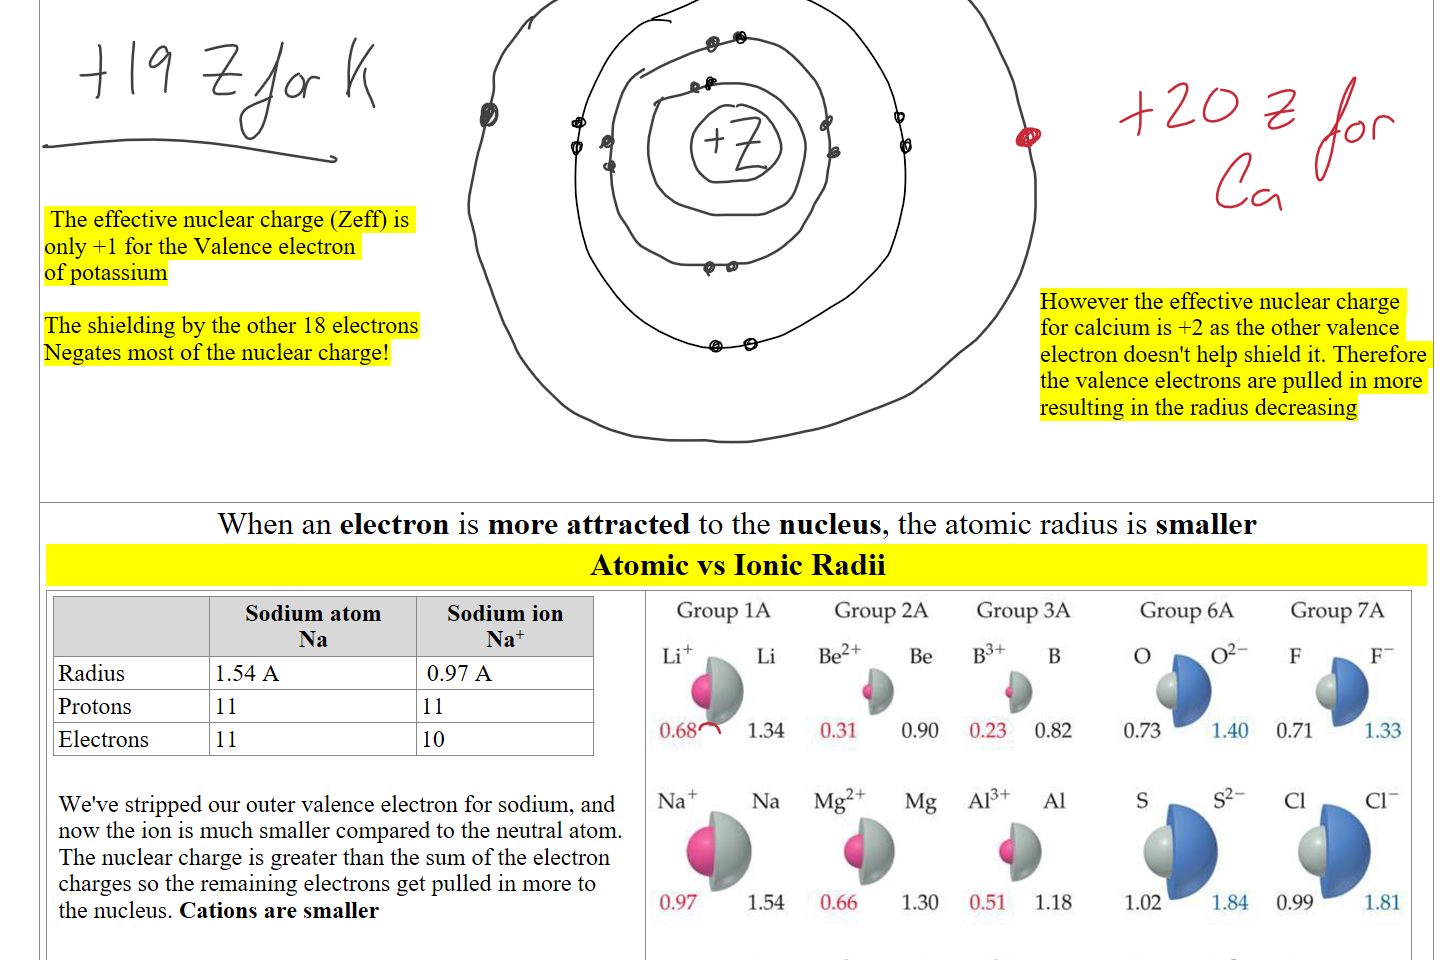 










 The effective nuclear charge (Zeff) is 
only +1 for the Valence electron 
of potassium

The shielding by the other 18 electrons
Negates most of the nuclear charge!







When an electron is more attracted to the nucleus, the atomic radius is smaller
Atomic vs Ionic Radii

Sodium atom
Na
Sodium ion
Na+
Radius
1.54 A
 0.97 A
Protons
11
11
Electrons
11
10

We've stripped our outer valence electron for sodium, and now the ion is much smaller compared to the neutral atom. The nuclear charge is greater than the sum of the electron charges so the remaining electrons get pulled in more to the nucleus. Cations are smaller


Untitled picture.emf Group IA 
Group 2A 
Group 3A 
133+ B 
0.23 082 
A13+ Al 
0.51 1.18 
Ga3• Ga 
0.62 126 
In3+ In 
0.81 1.44 
Group 6A 
Group 7A 
0.68 
Li 
1.34 
Be2+ 
0.31 
Mg2• 
Be 
0.90 
o 
0.73 
02 ¯ 
1.40 
0.71 
1.33 
0.97 1.54 
1.33 1.96 
Rb 
2.11 
1.47 
Mg 
0.66 1.30 
0.99 1.74 
Sr2+ Sr 
1.13 
1.92 
1.02 184 
Se se2- 
1.16 
1.98 
1.35 
2.21 
1.81 
1.14 
1.96 
1.33 
2.20 
Ink Drawings
Ink Drawings
Ink Drawings
Ink Drawings
Ink Drawings
Ink Drawings
Ink Drawings
Ink Drawings
Ink Drawings
Ink Drawings
Ink Drawings
Ink Drawings
Ink Drawings
Ink Drawings
Ink Drawings
Ink Drawings
Ink Drawings
Ink Drawings
Ink Drawings
Ink Drawings
Ink Drawings
Ink Drawings
Ink Drawings
Ink Drawings
Ink Drawings
Ink Drawings
Ink Drawings
Ink Drawings
Ink Drawings
Ink Drawings
Ink Drawings
Ink Drawings
Ink Drawings
Ink Drawings
Ink Drawings
Ink Drawings
Ink Drawings
Ink Drawings
Ink Drawings
Ink Drawings
Ink Drawings
Ink Drawings
Ink Drawings
Ink Drawings
Ink Drawings
However the effective nuclear charge for calcium is +2 as the other valence electron doesn't help shield it. Therefore the valence electrons are pulled in more resulting in the radius decreasing
Ink Drawings
Ink Drawings
Ink Drawings
Ink Drawings
Ink Drawings
Ink Drawings
Ink Drawings
Ink Drawings
Ink Drawings
Ink Drawings
Ink Drawings
Ink Drawings
